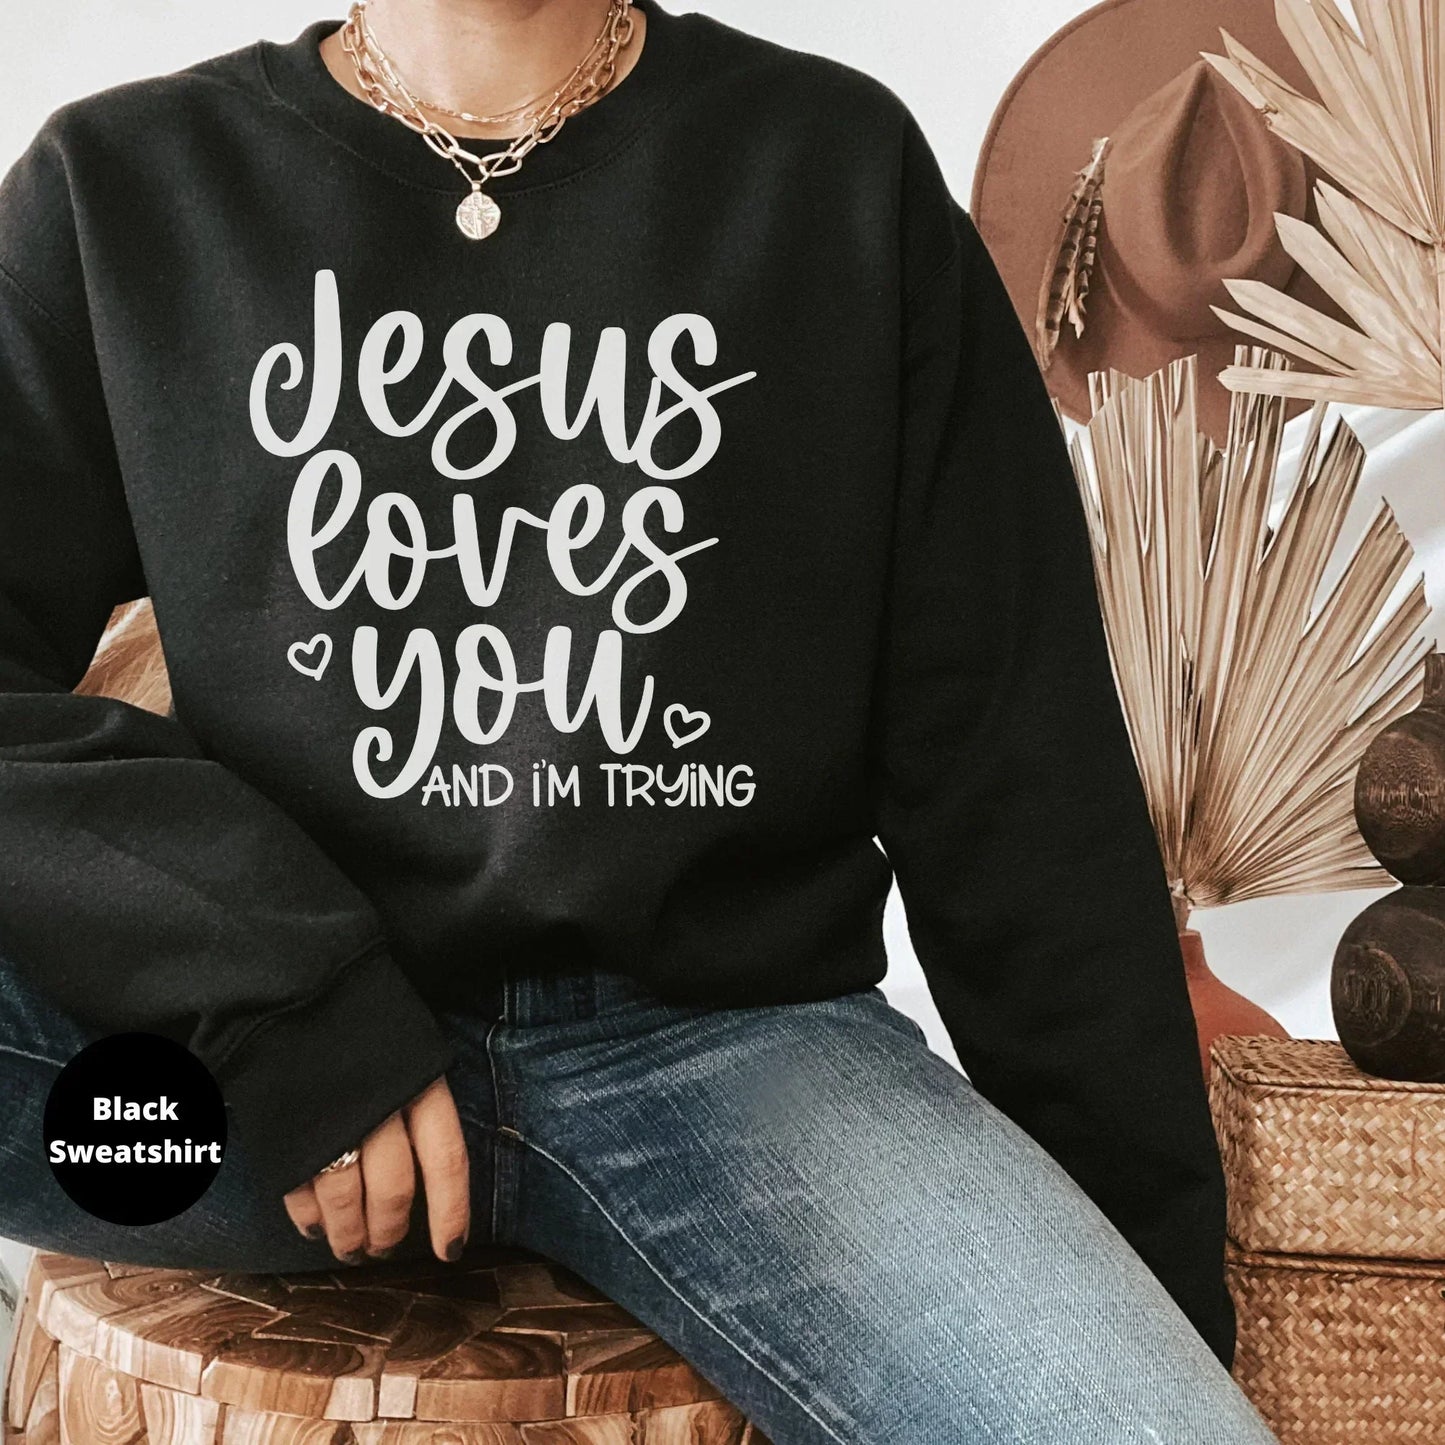 Jesus Loves You, I'm Trying. Funny Christian Shirt